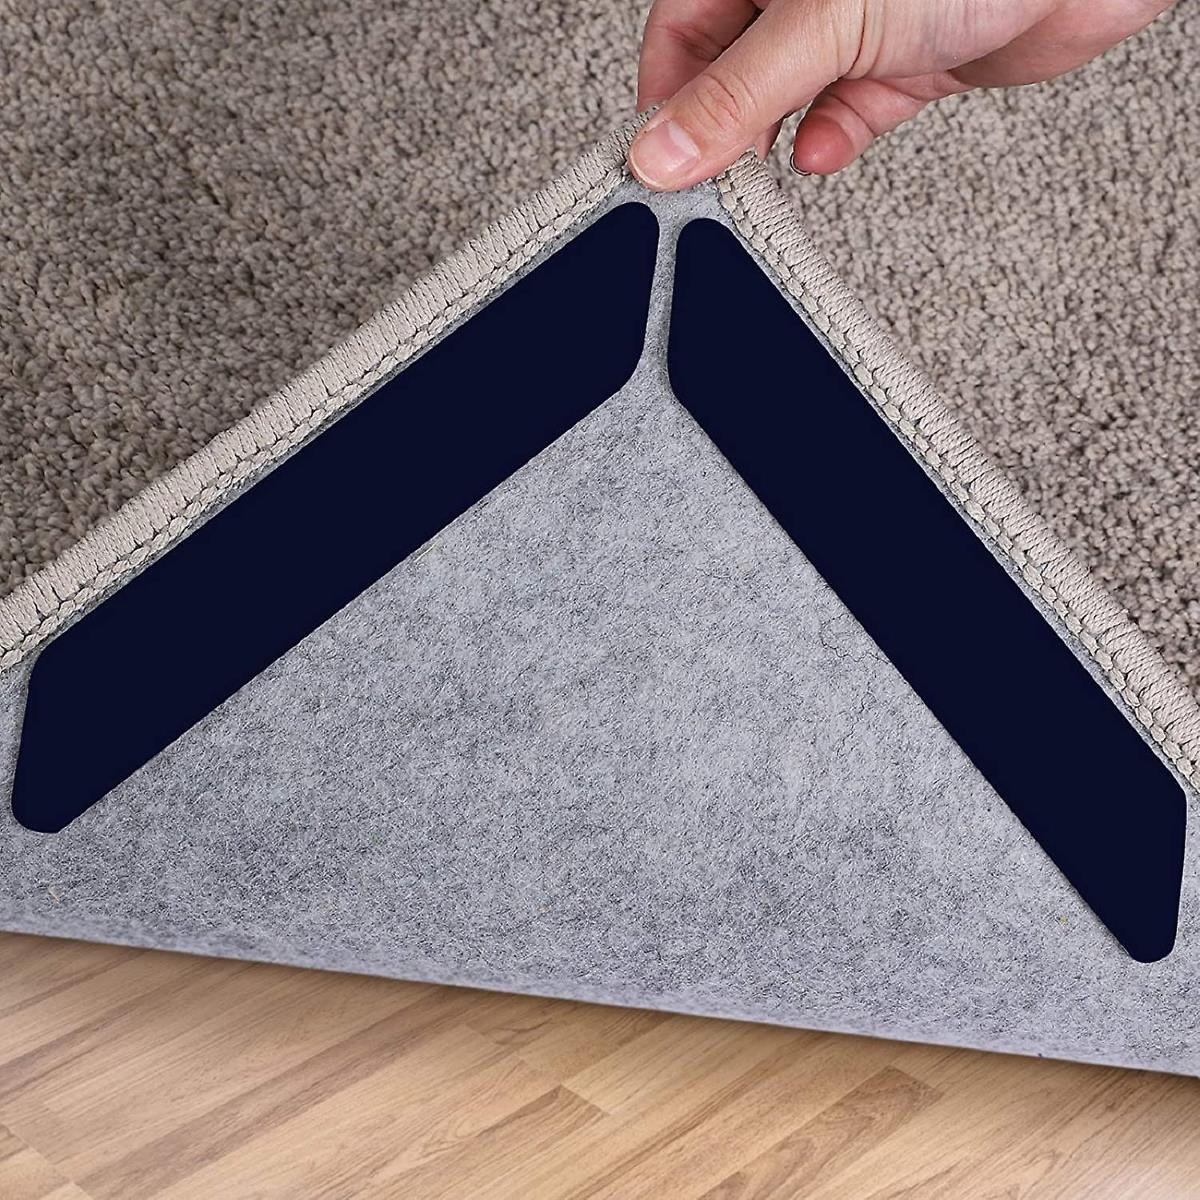 How To Remove A Carpet Gripper